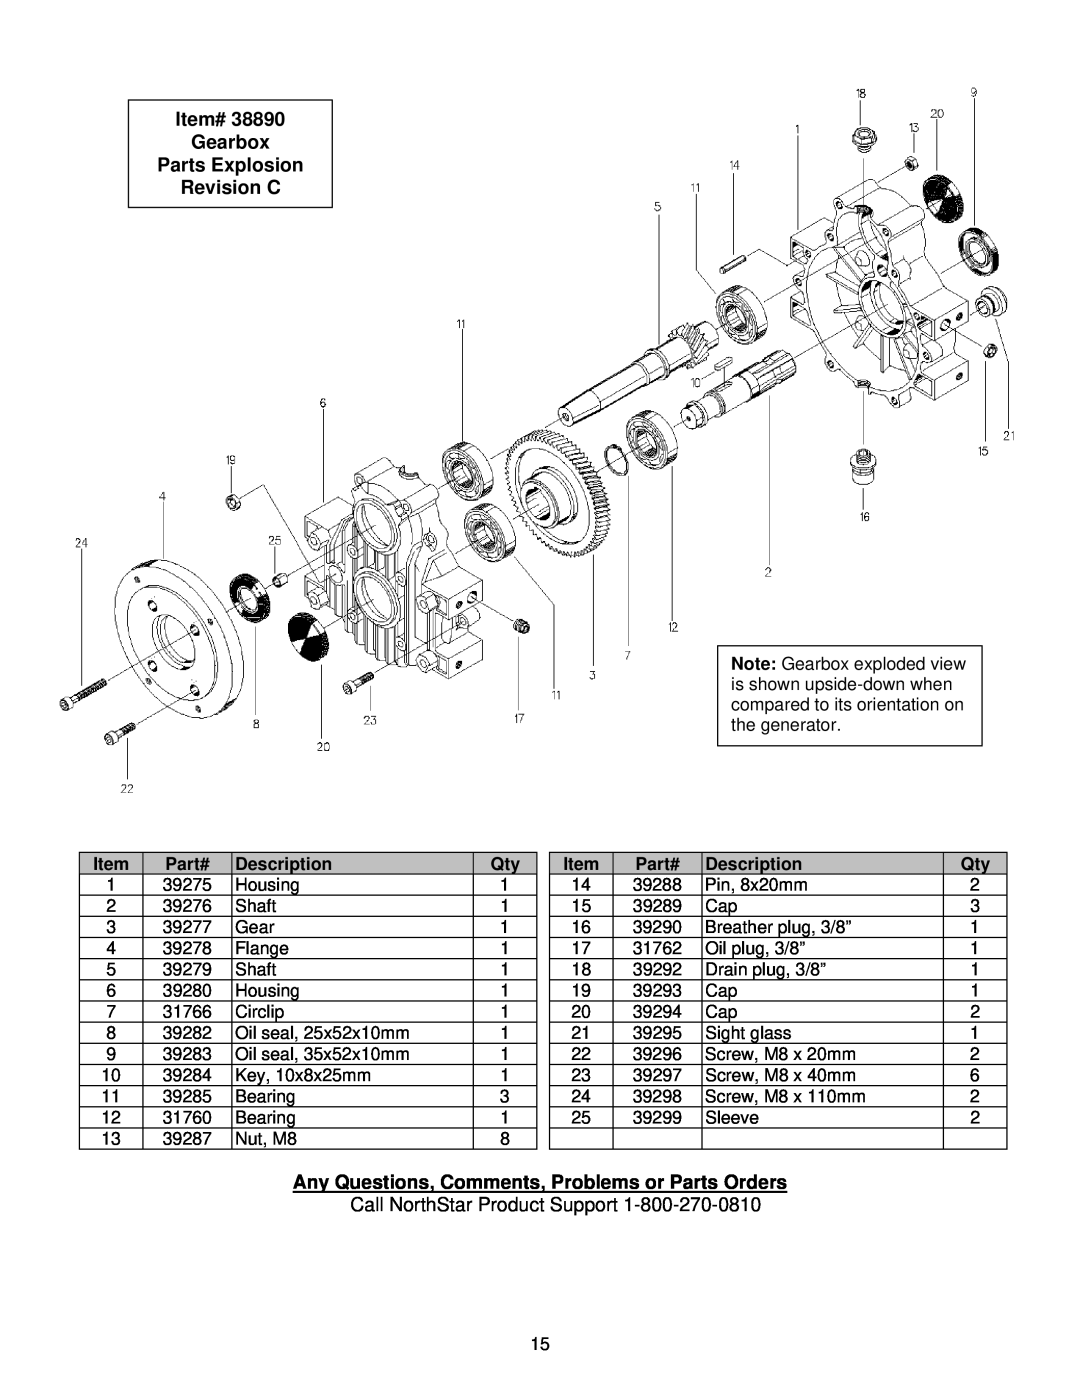 North Star M165951C Item# Gearbox Parts Explosion Revision C, Any Questions, Comments, Problems or Parts Orders, Part# 